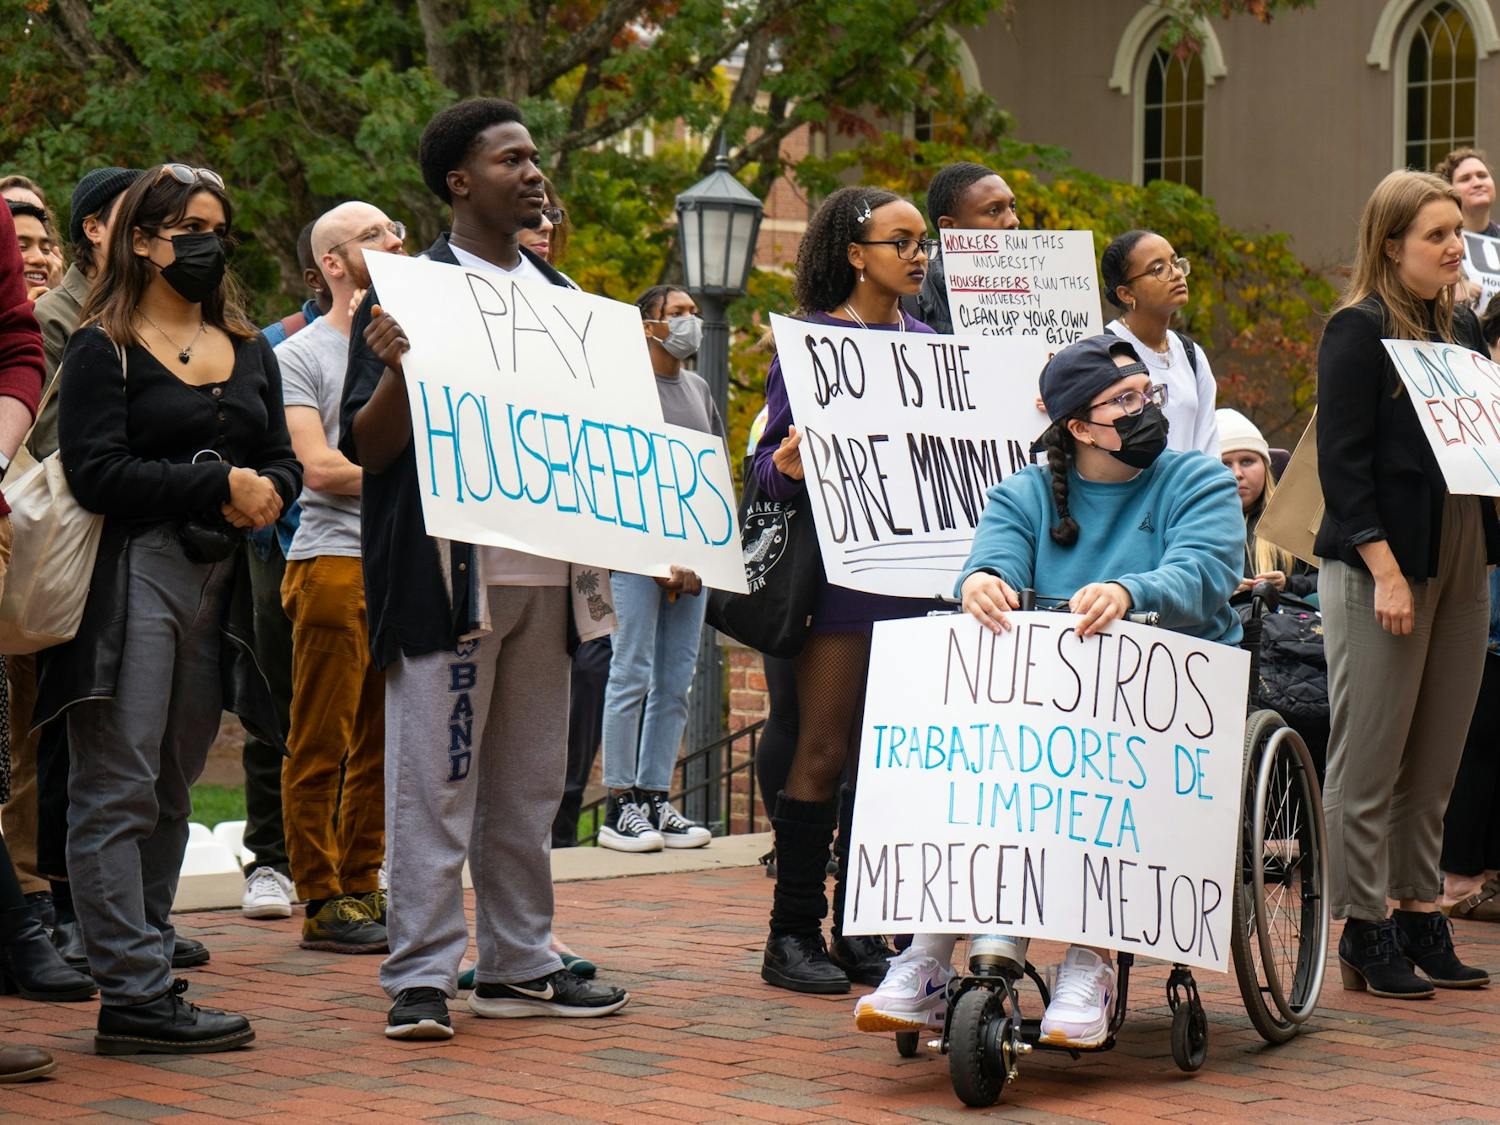 UNC students hold placards in support of the UNC Houseekepers March & Rally at the Old Well on Oct. 28, 2022.